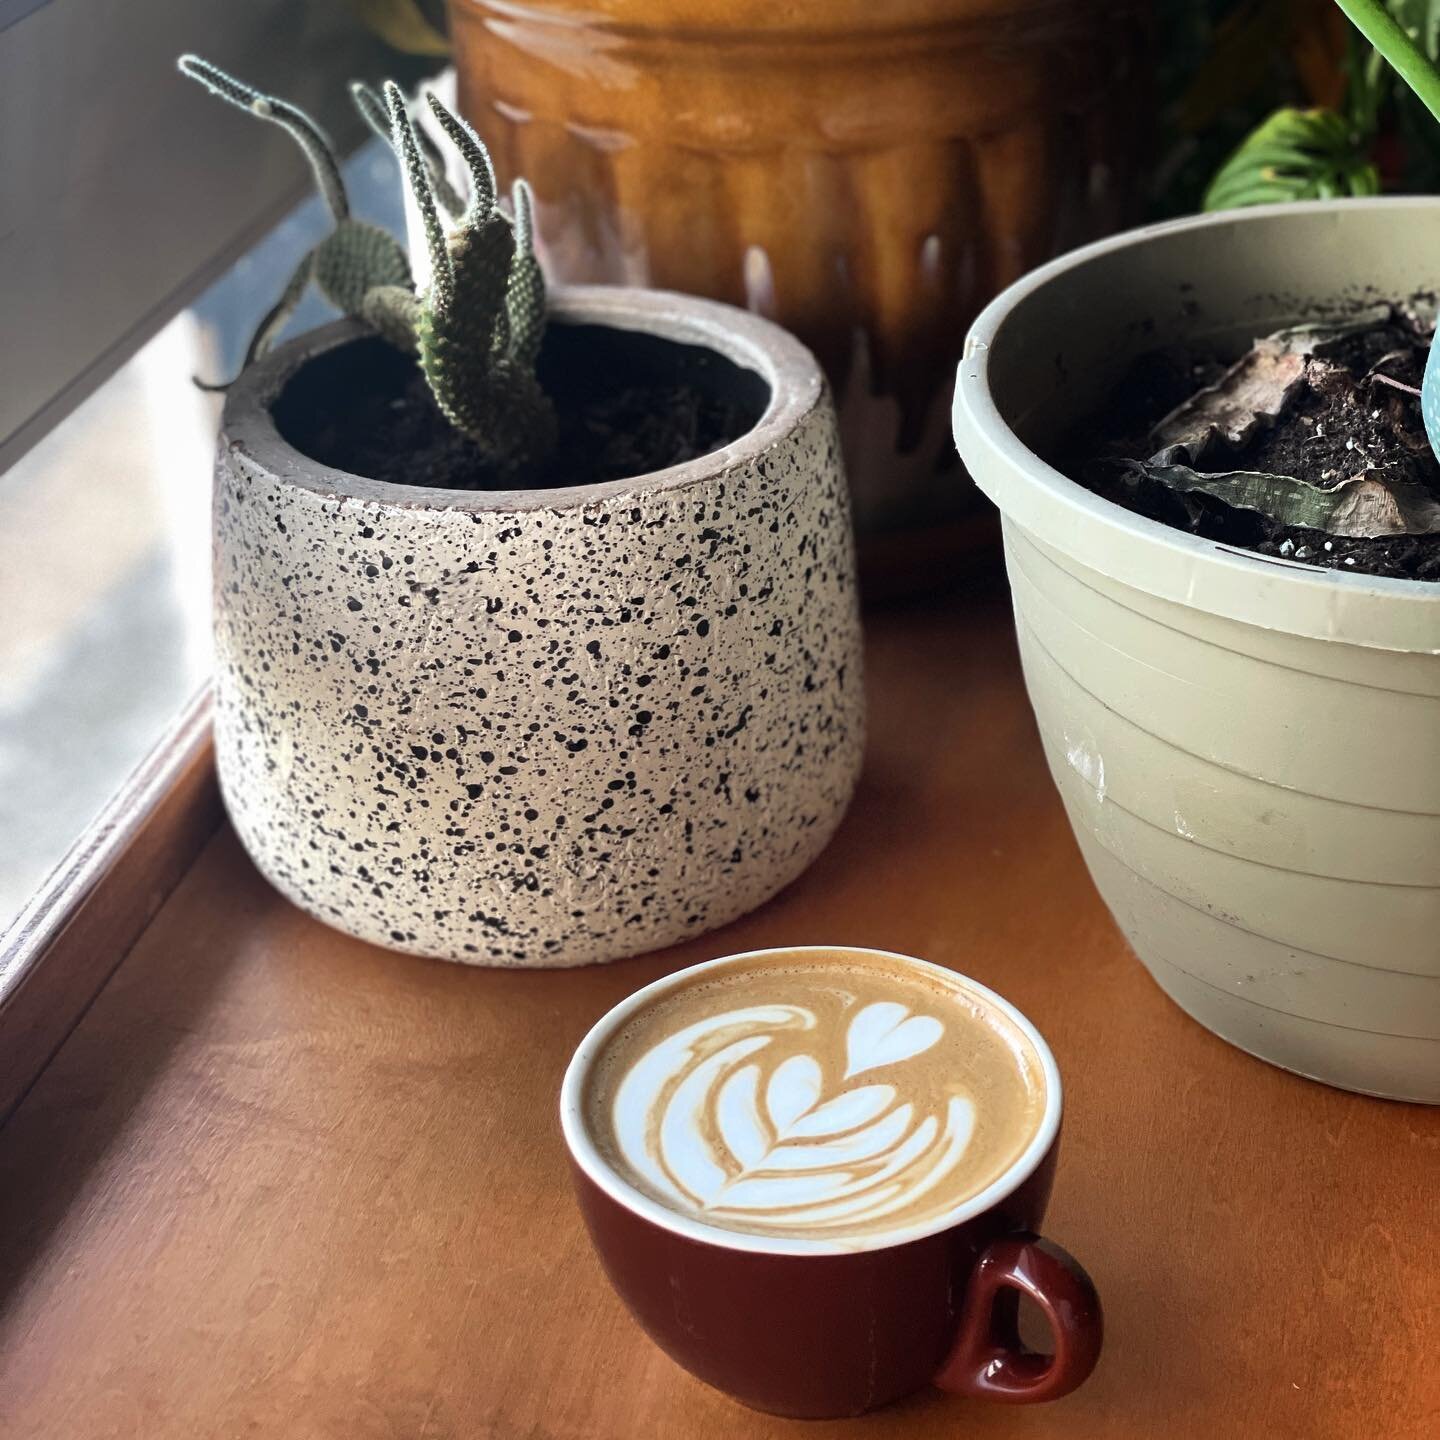 Almost to the weekend!! Hang in there! 
.
.
📍Goldsprinthsv
.
.
#CraftCoffeeTrail #CraftCoffee #DrinkCoffee #DrinkLocal #BrewLocal #SupportLocal #DowntownHsv #DowntownHuntsville #exploredowntown #ihearthsv #visithuntsvilleal #coffeeaddict